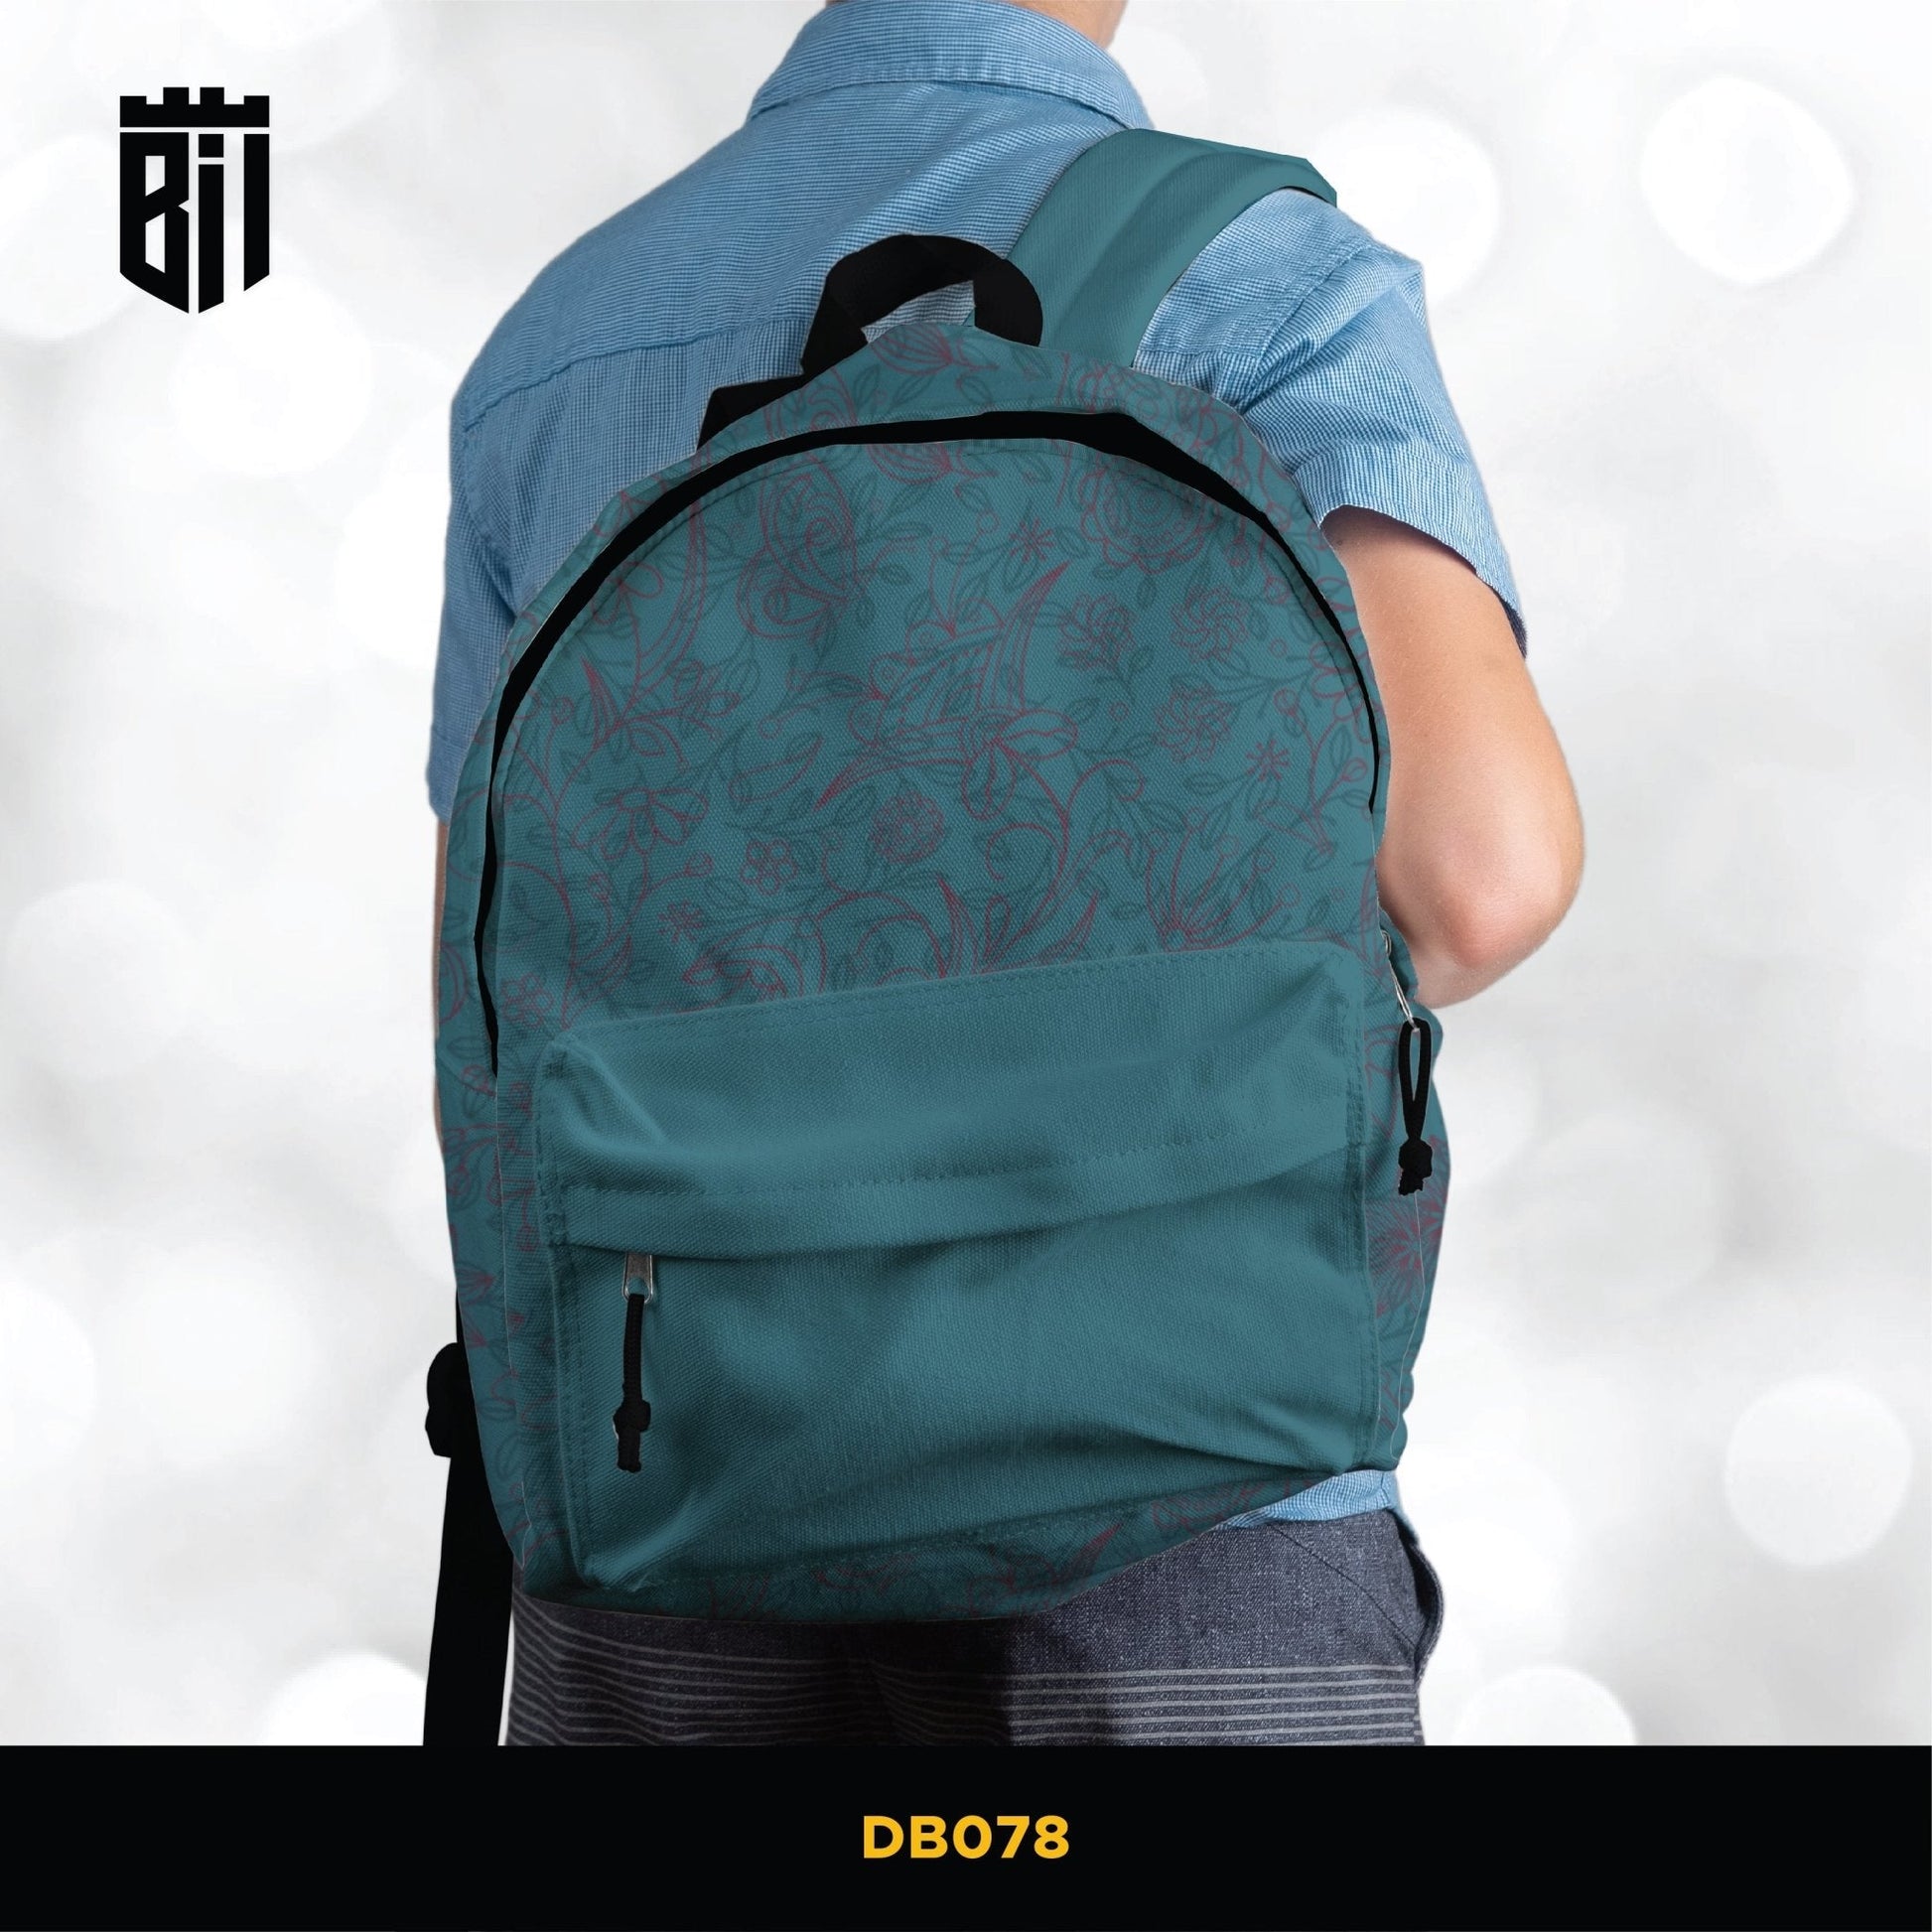 DB078 Green Floral Allover Printed Backpack - BREACHIT